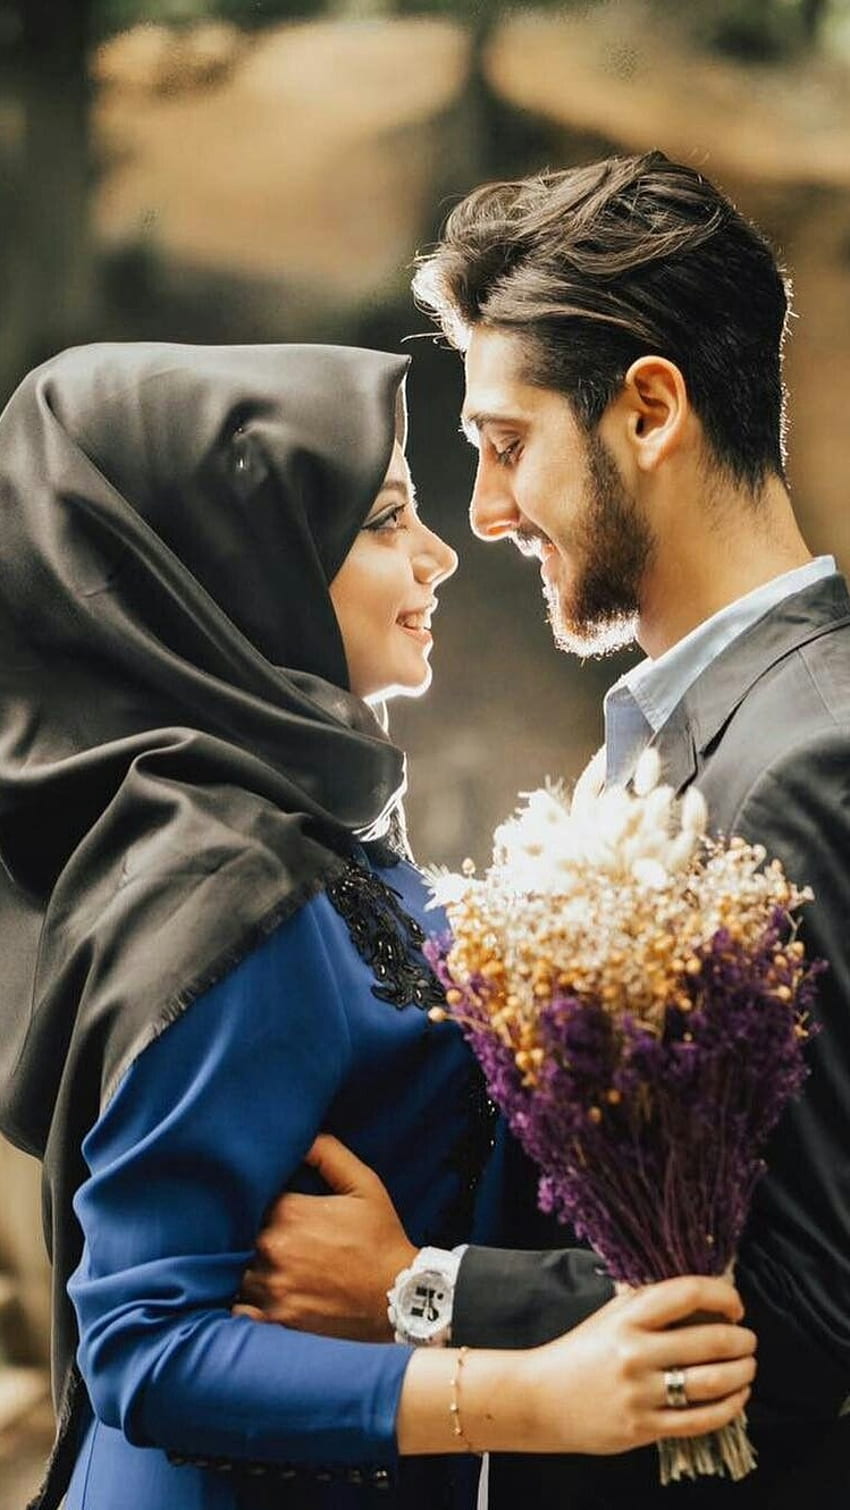 Incredible Collection of Full 4K Islamic Couple Images – Over 999+ Stunning Photos